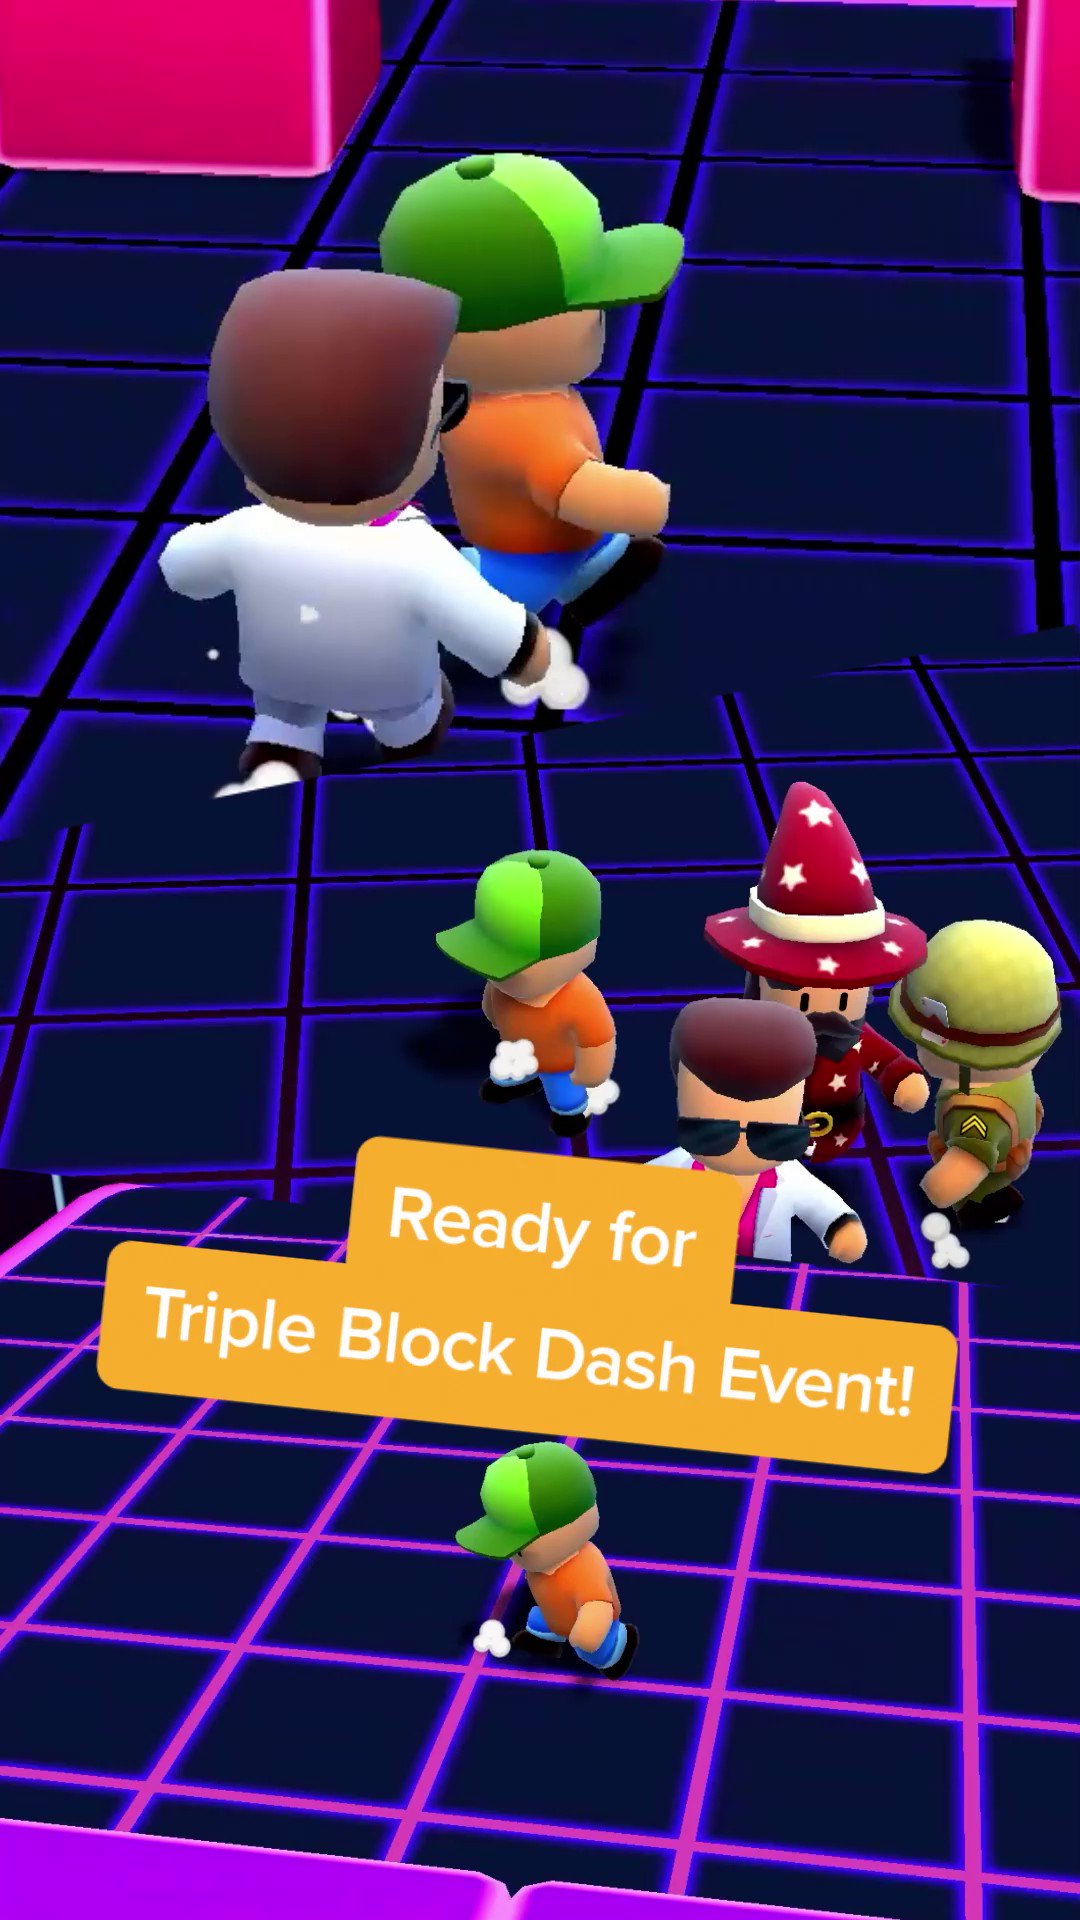 Stumble Guys on X: 🤩 Who's ready for the Triple Block Dash event? Three  times the jumping and dashing, three times the fun! 🤸‍♂️ Tag your friends  you plan to play with!